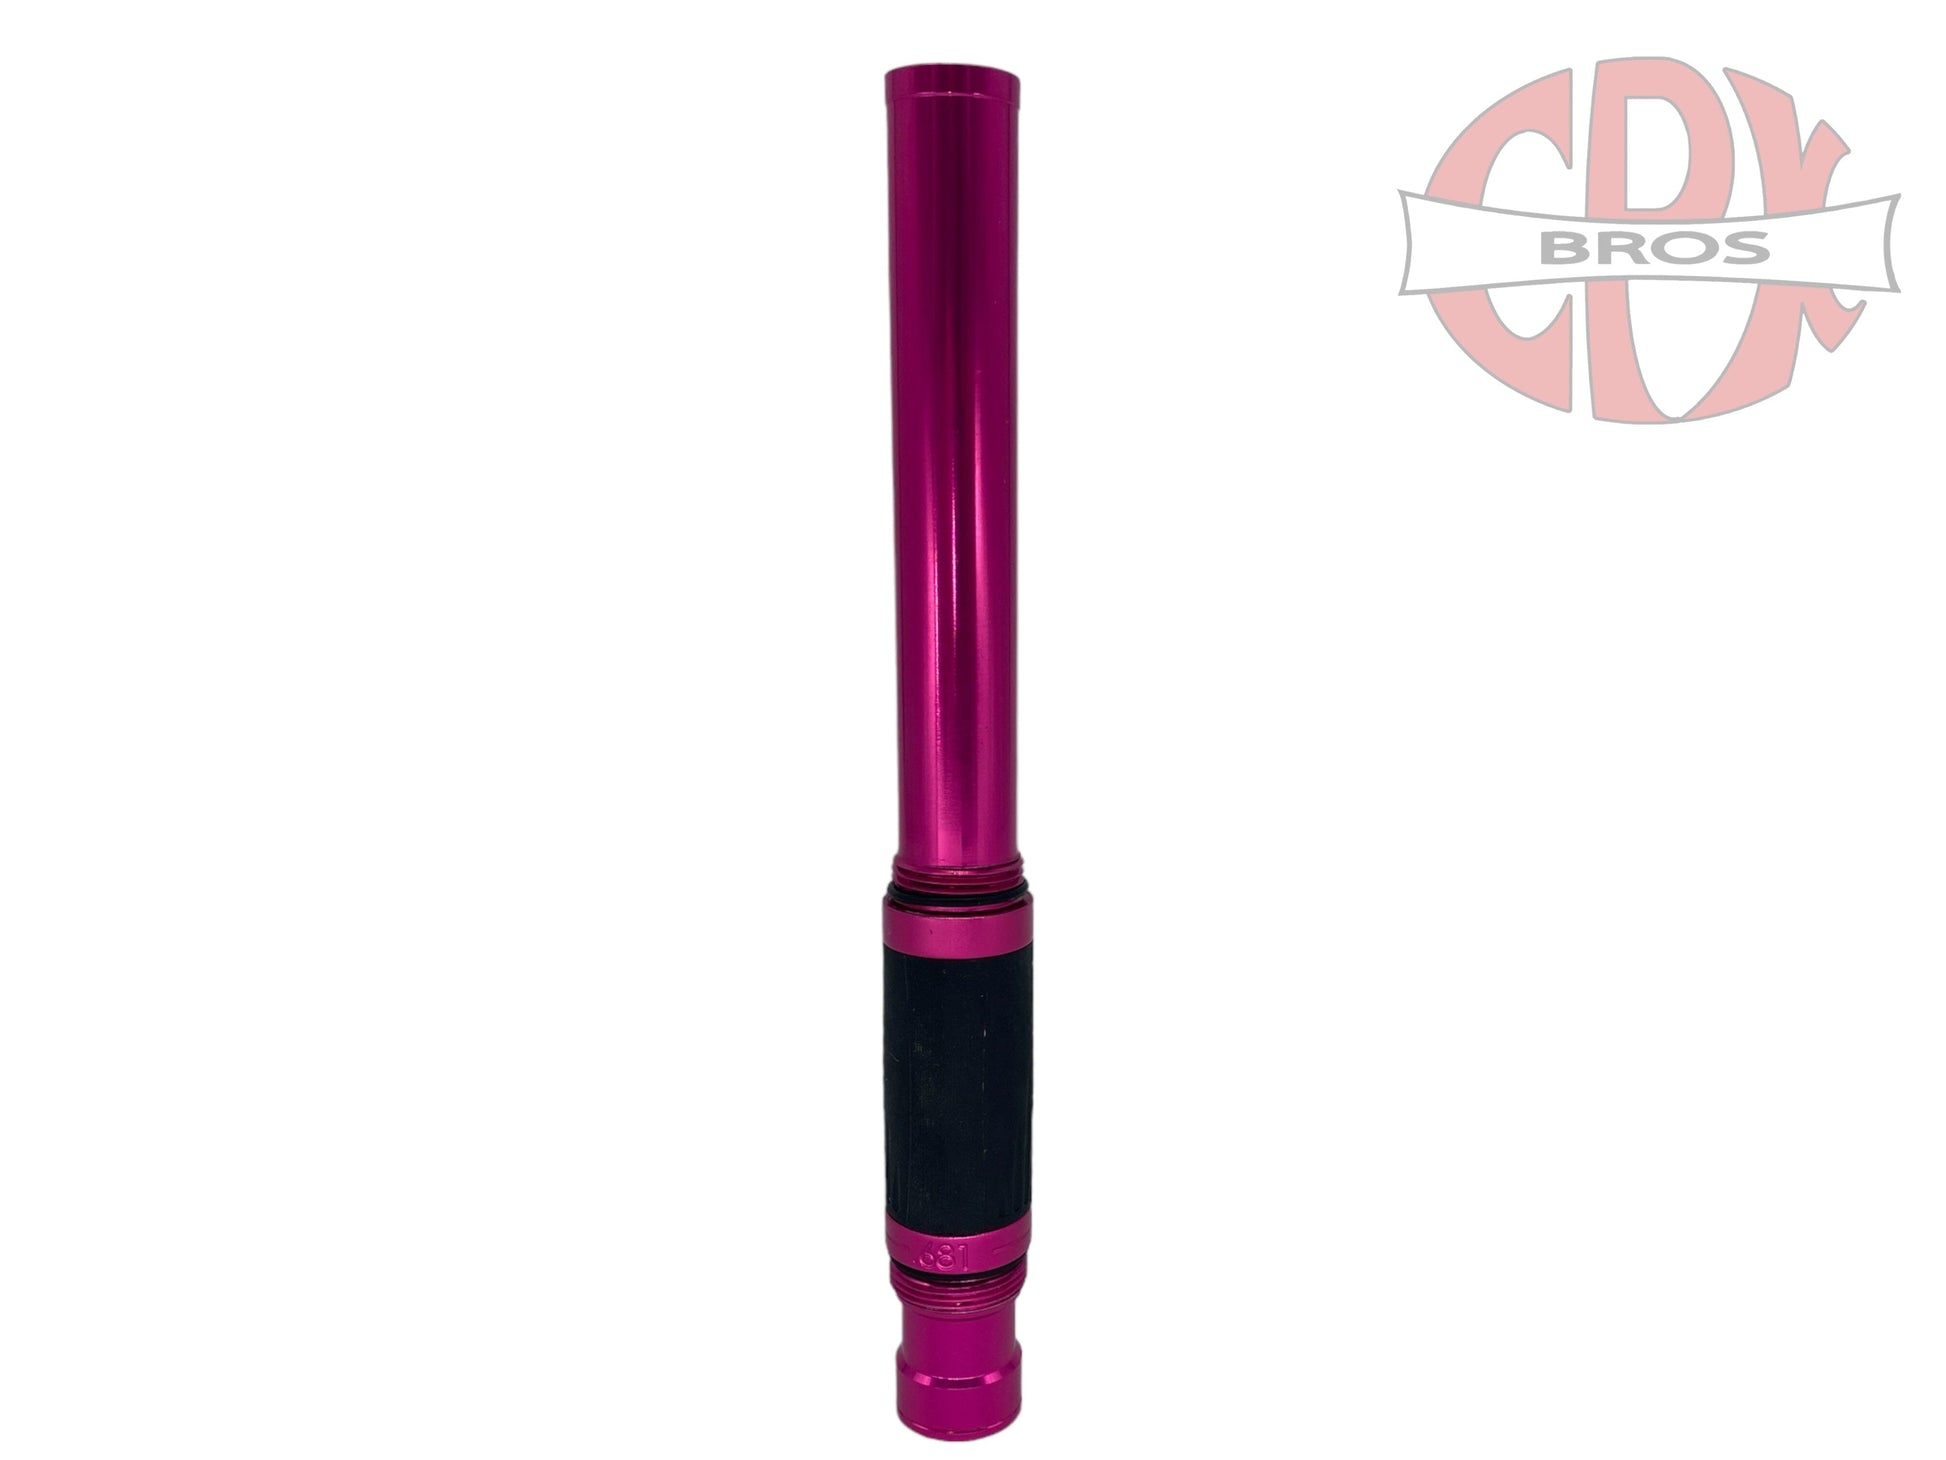 Used Planet Eclipse Shaft Fl Barrel Back .681 Pink Paintball Gun from CPXBrosPaintball Buy/Sell/Trade Paintball Markers, New Paintball Guns, Paintball Hoppers, Paintball Masks, and Hormesis Headbands